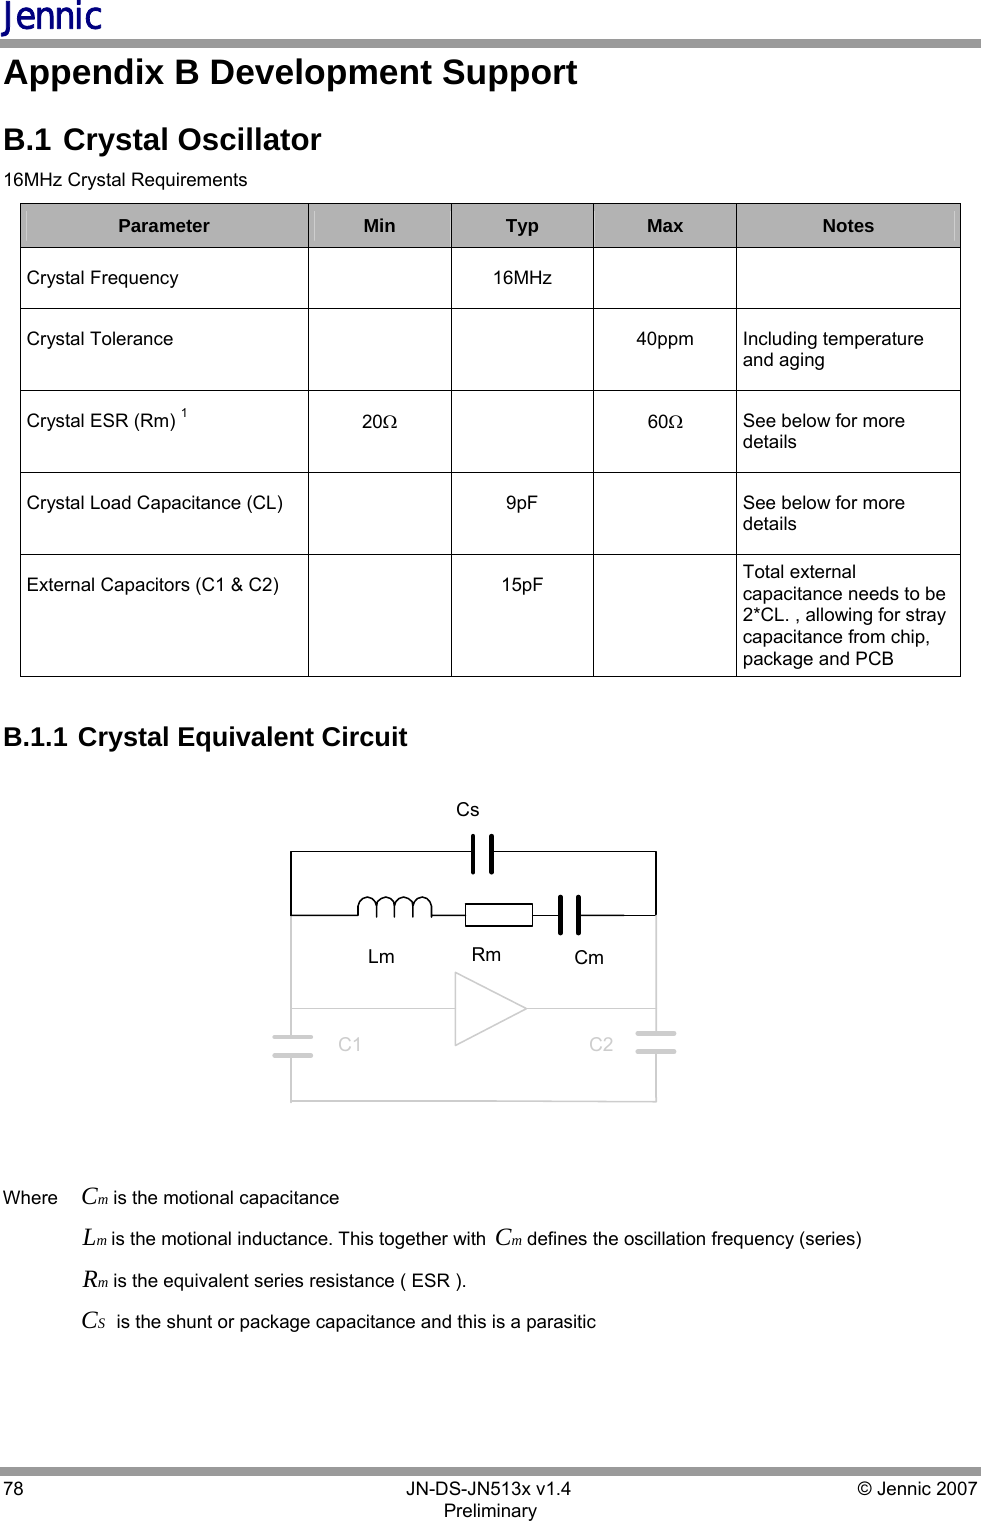 Jennic 78        JN-DS-JN513x v1.4  © Jennic 2007 Preliminary Appendix B Development Support B.1  Crystal Oscillator 16MHz Crystal Requirements Parameter  Min  Typ  Max  Notes Crystal Frequency    16MHz     Crystal Tolerance      40ppm  Including temperature and aging Crystal ESR (Rm) 1  20Ω  60Ω See below for more details   Crystal Load Capacitance (CL)    9pF    See below for more details   External Capacitors (C1 &amp; C2)     15pF    Total external capacitance needs to be 2*CL. , allowing for stray capacitance from chip, package and PCB   B.1.1  Crystal Equivalent Circuit  CsLm CmRmC2C1  Where   mCis the motional capacitance   mLis the motional inductance. This together with  mCdefines the oscillation frequency (series)  mRis the equivalent series resistance ( ESR ).   SC is the shunt or package capacitance and this is a parasitic  